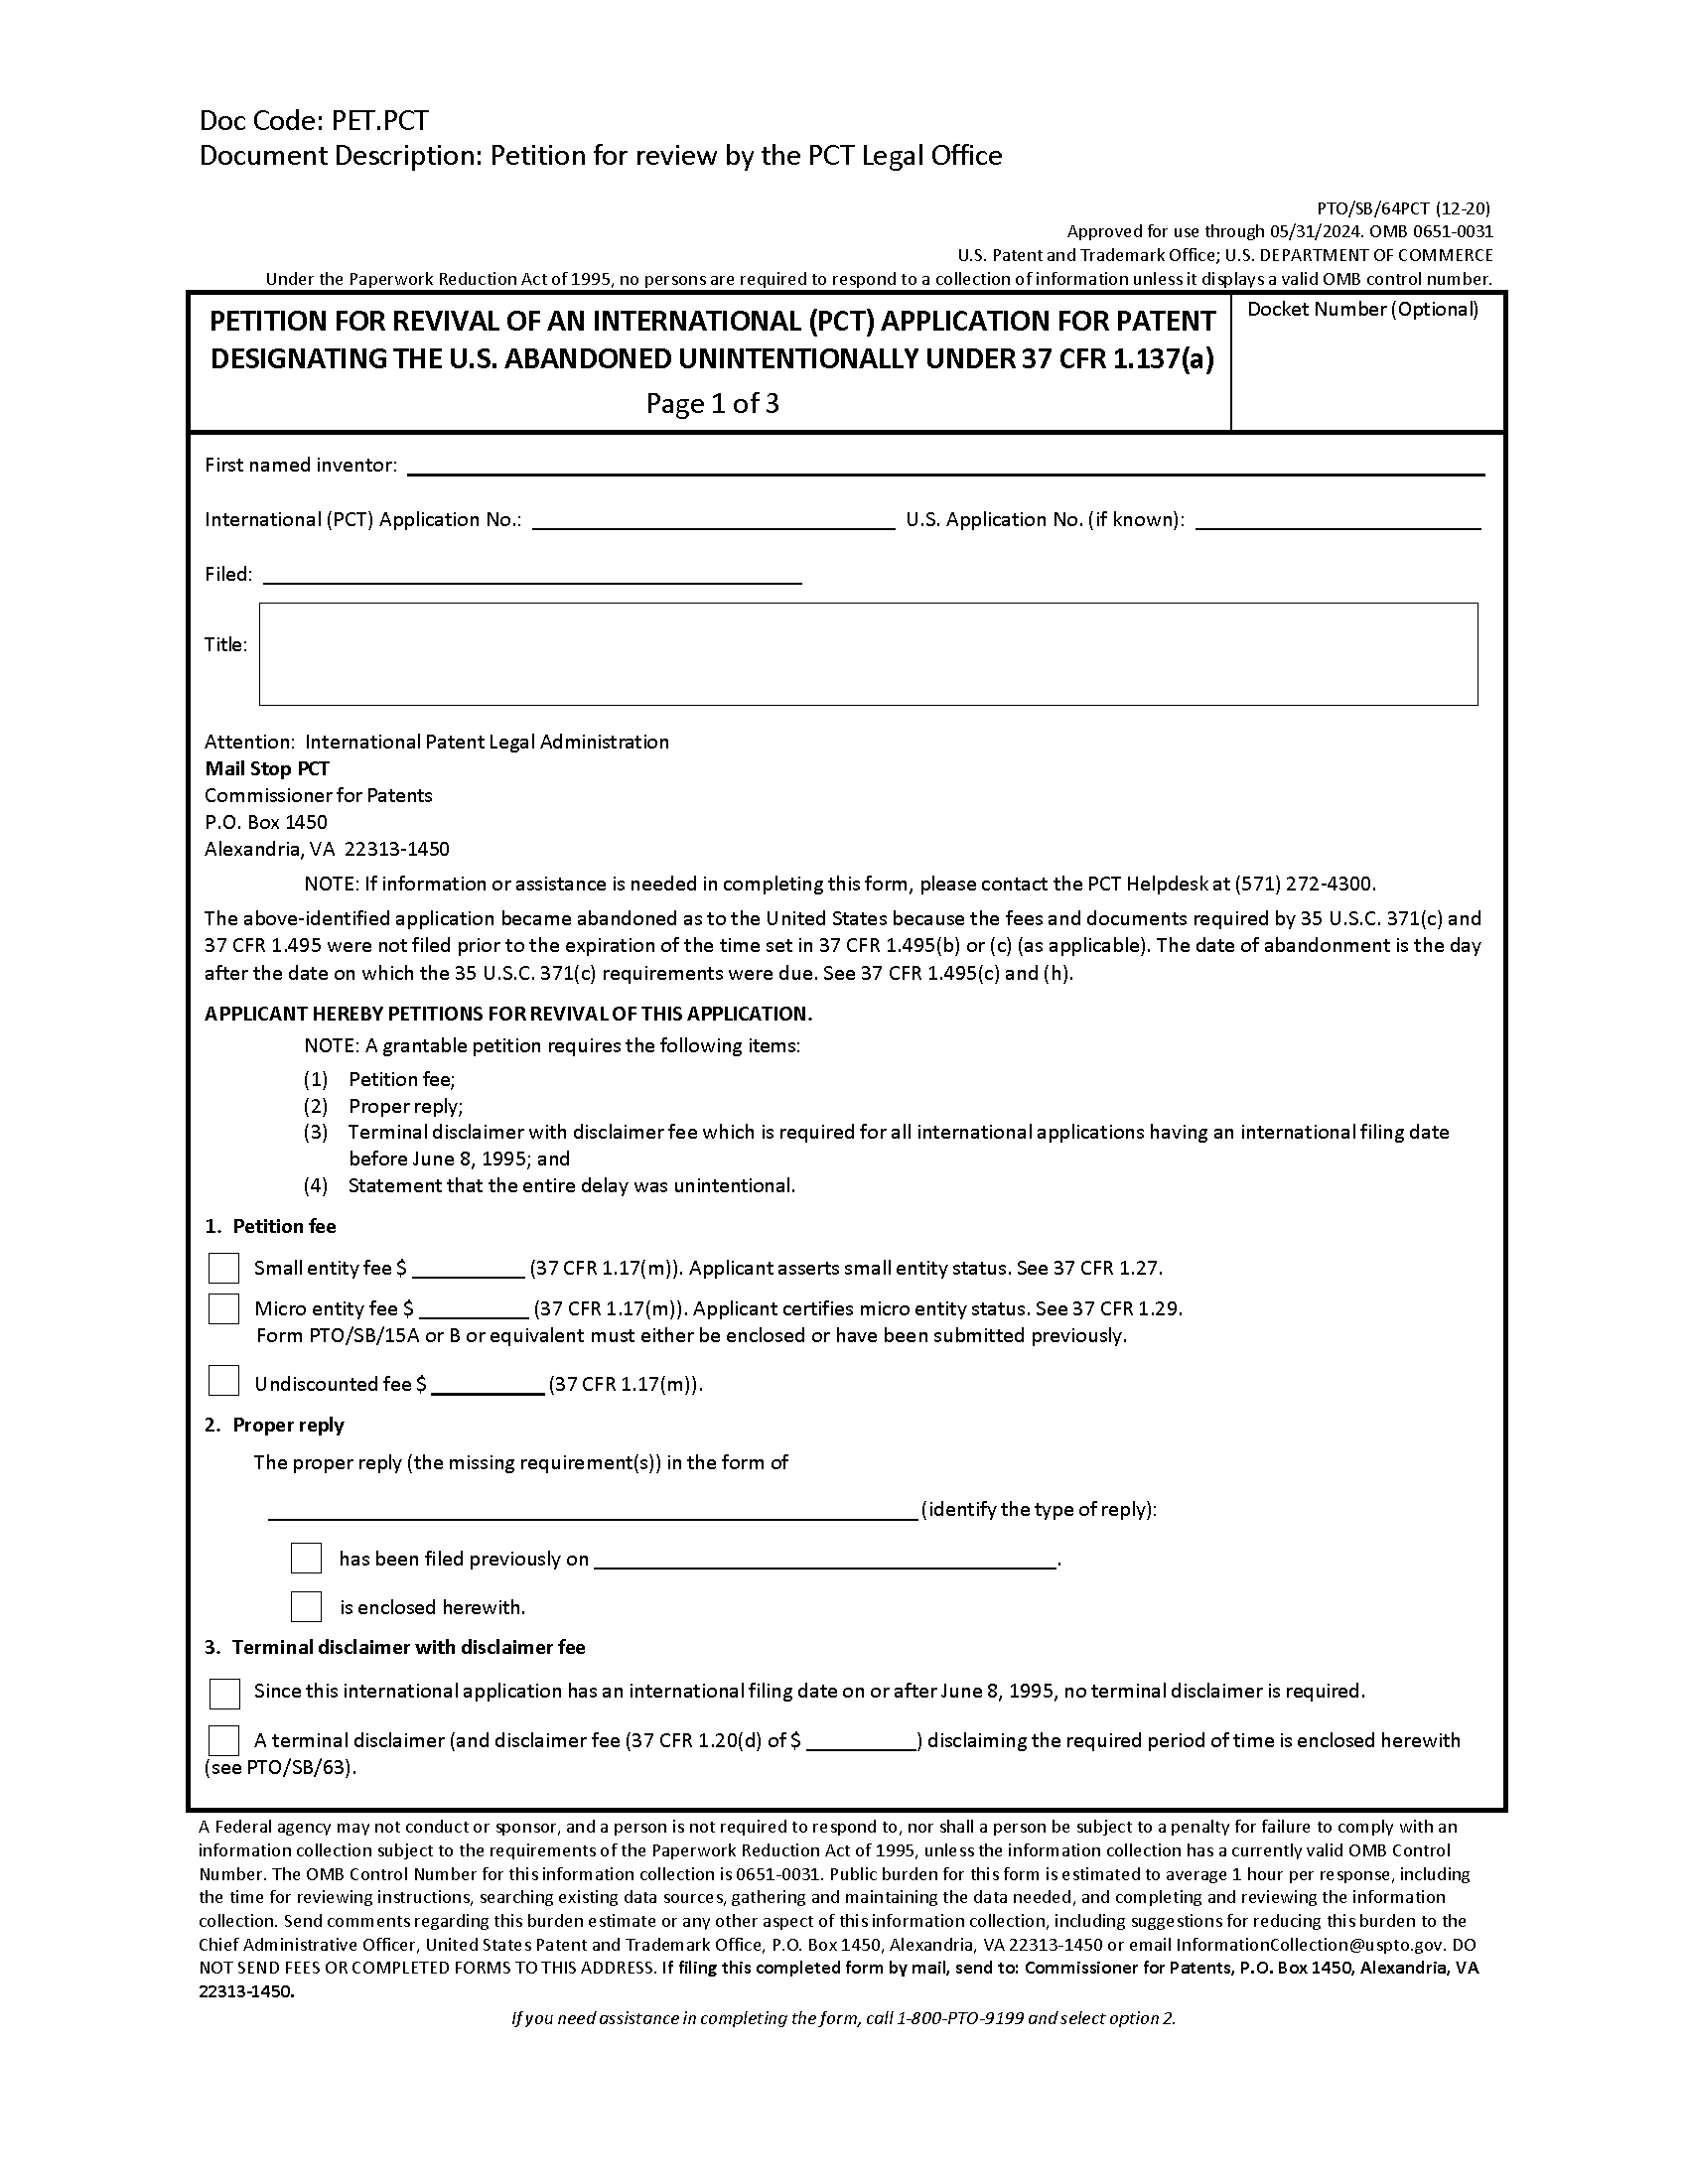 Form PTO/SB/64/PCT Petition for Revival of an International Application for Patent Designating the U.S. Abandoned Intentionally Under 37 CFR 1.137(b) [Page 1 of 3]